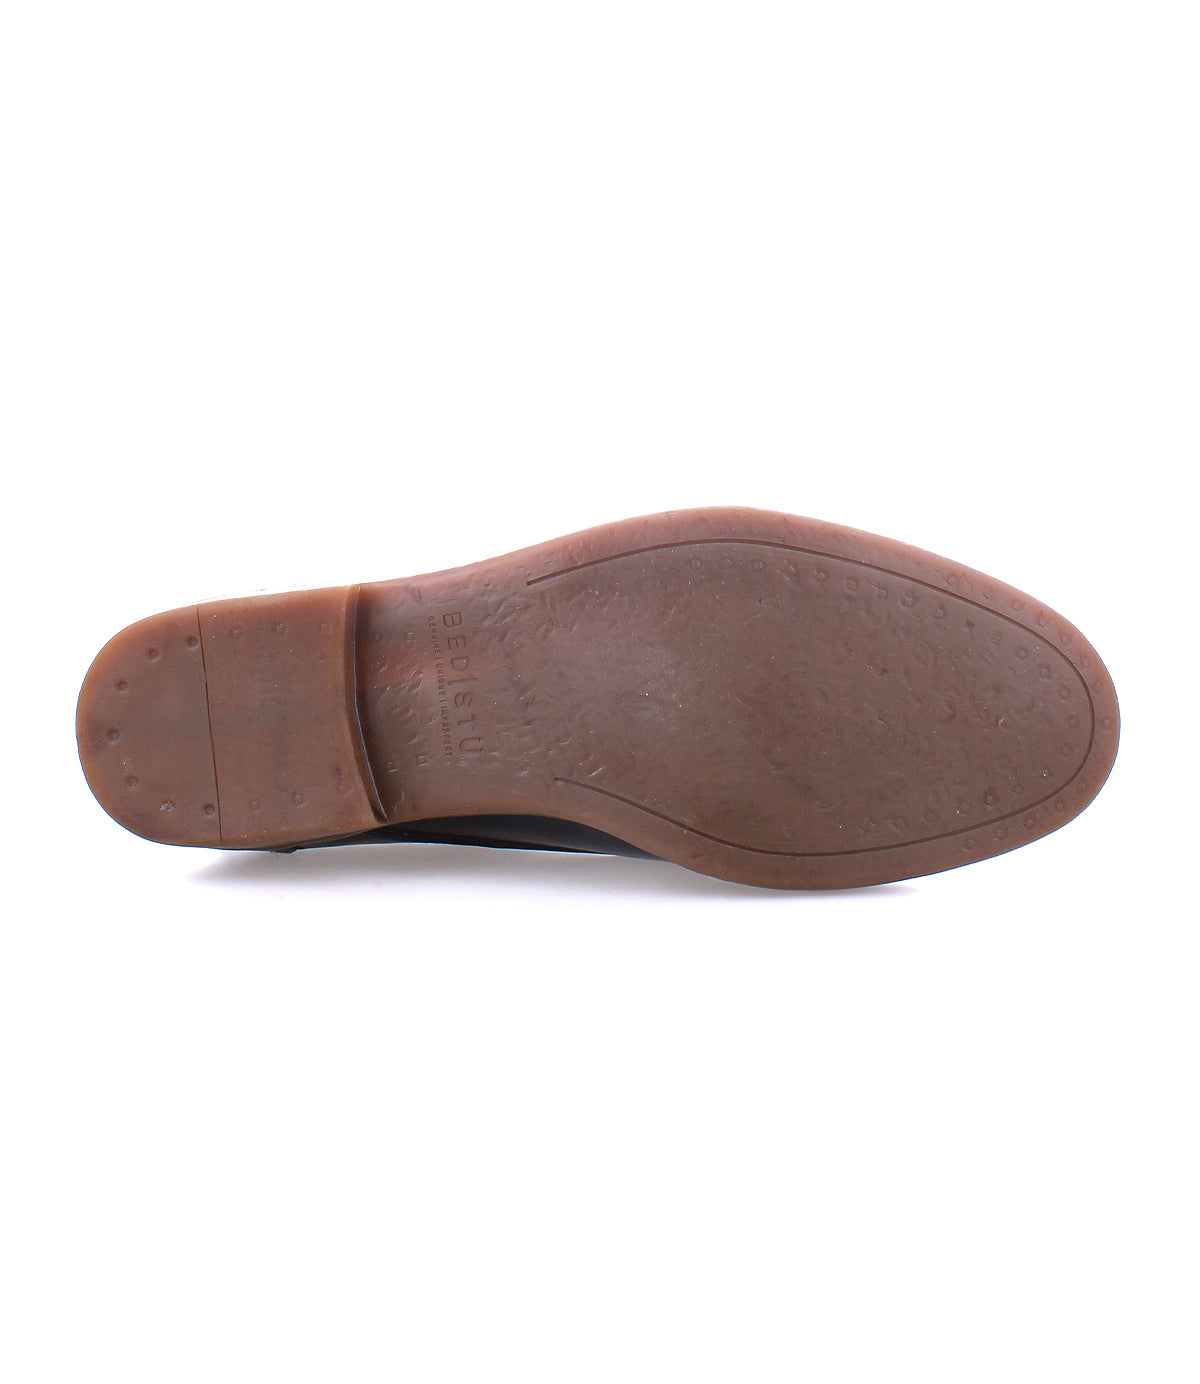 The back view of a men's Bed Stu Illiad leather chukka boot with a brown sole.